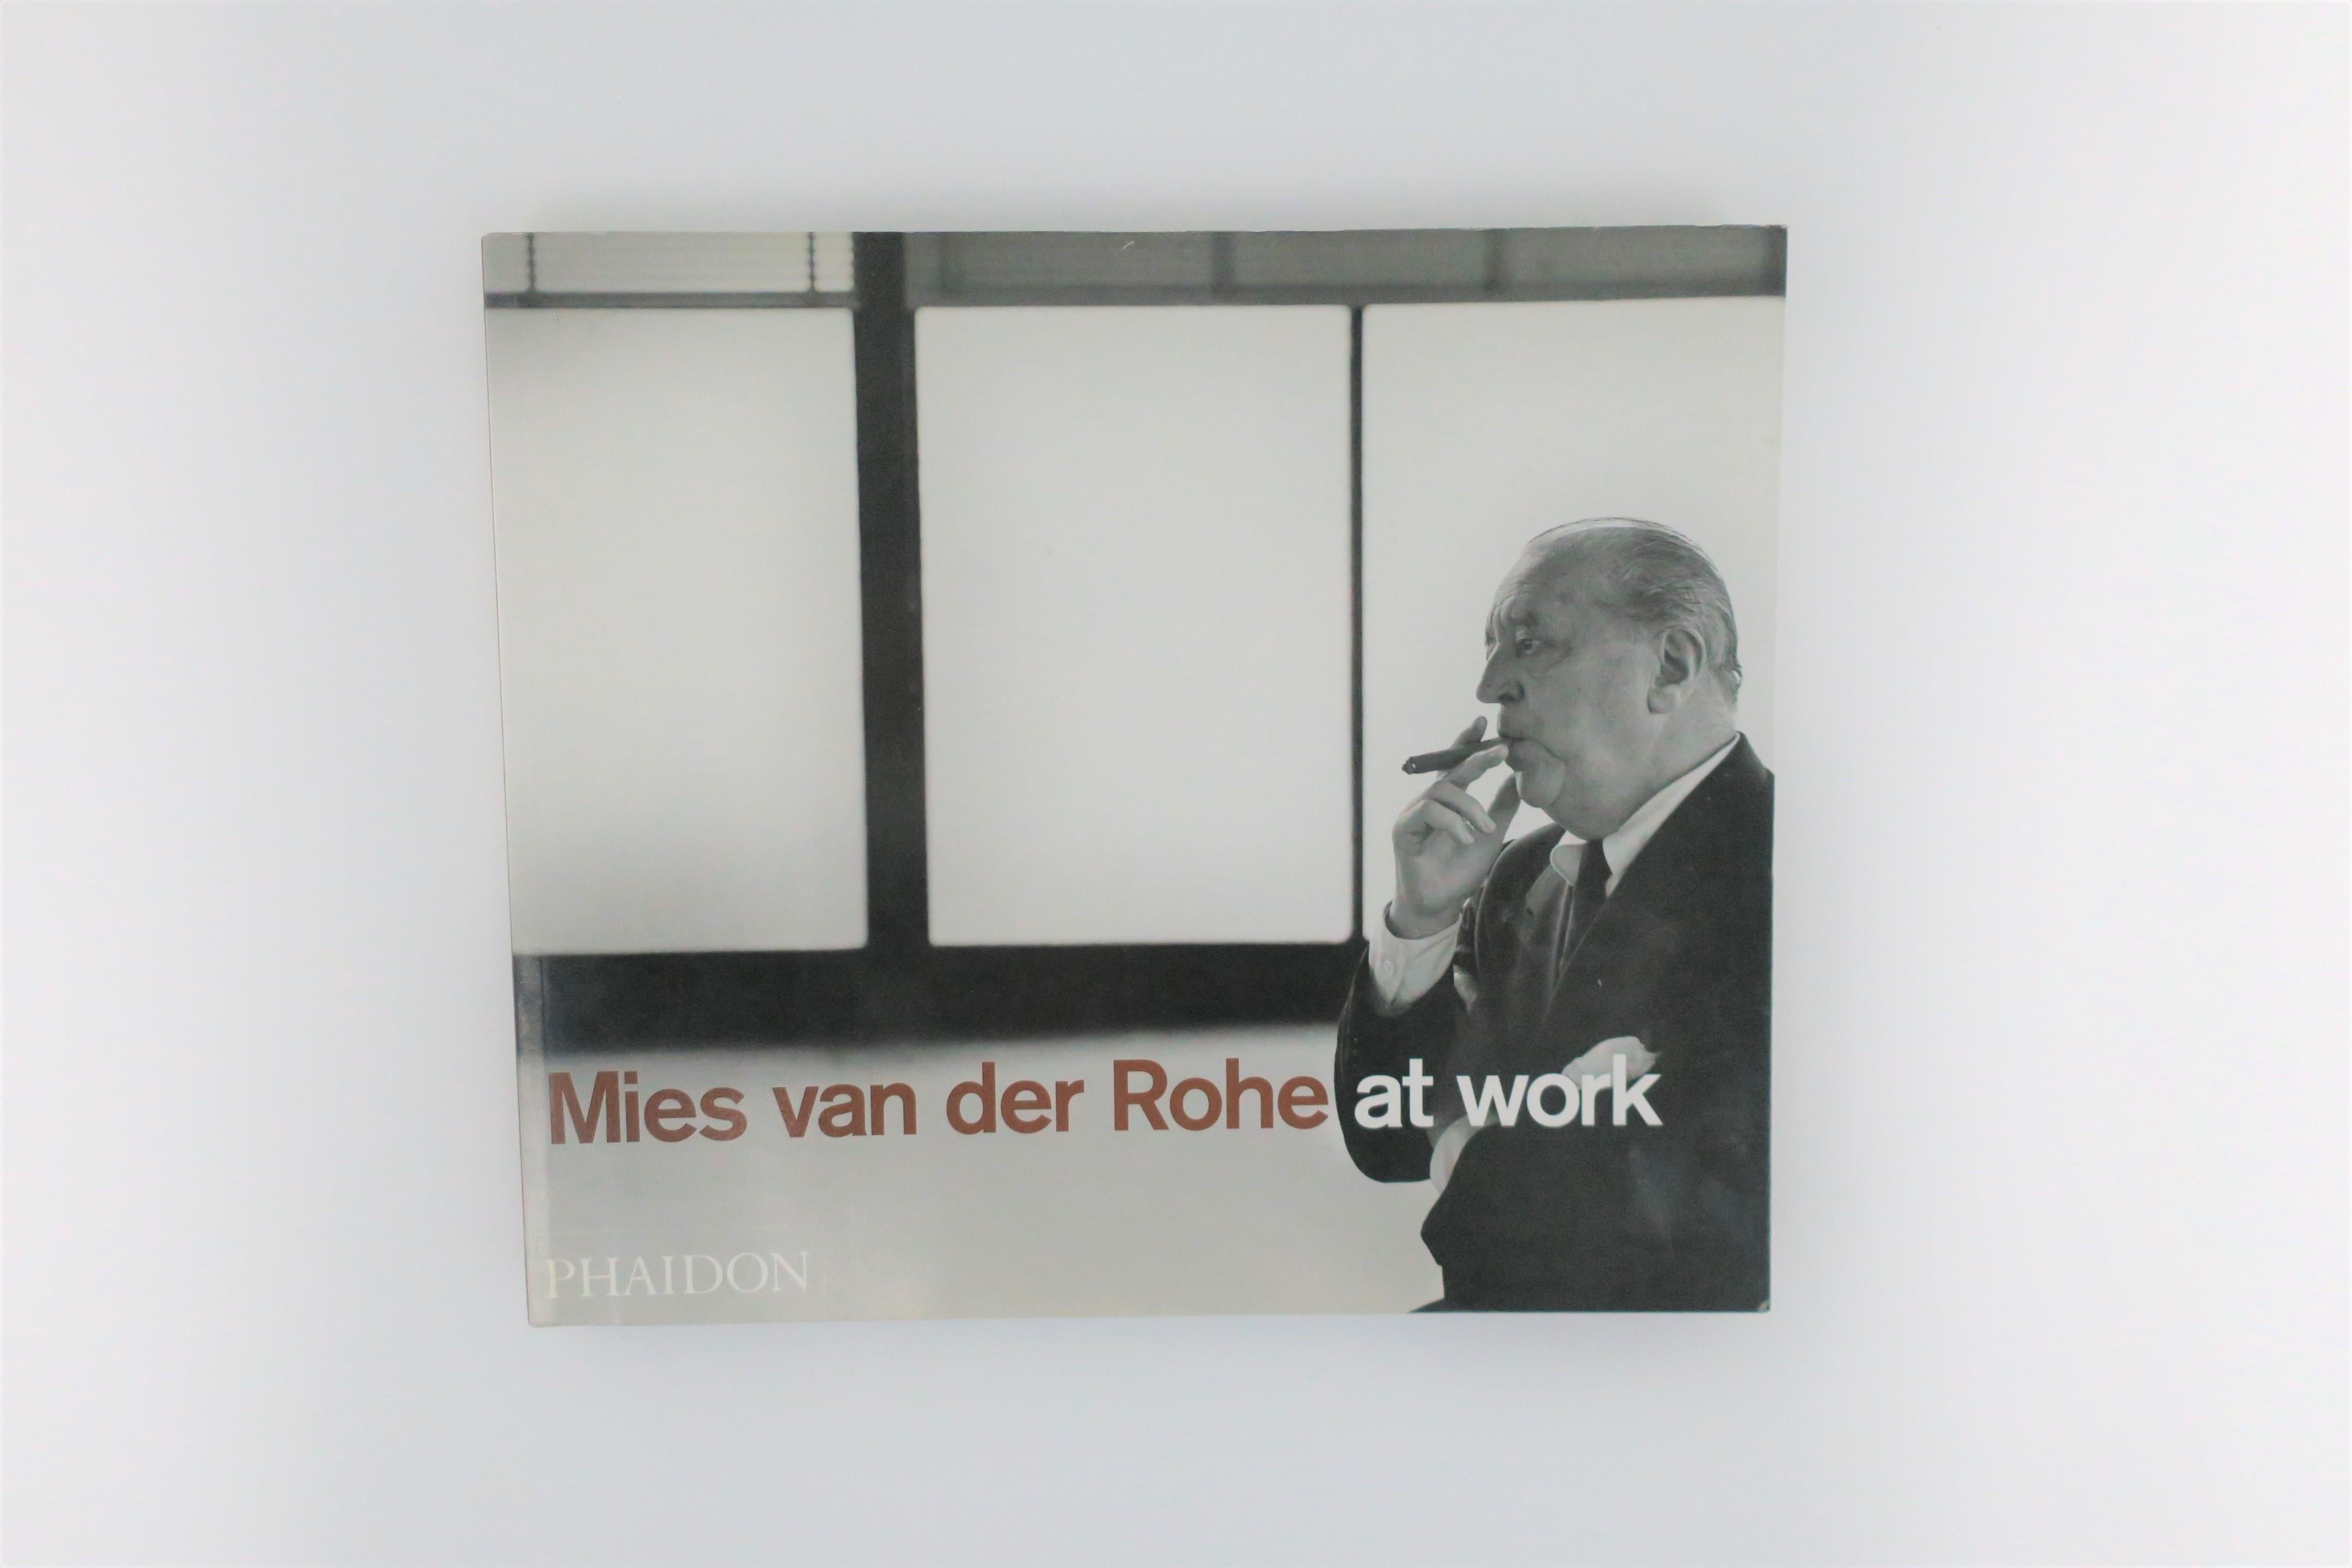 'Mies van der Rohe at work' coffee table or library book. 
An incredible book by Peter Carter who correlates Mies van der Rohe's 